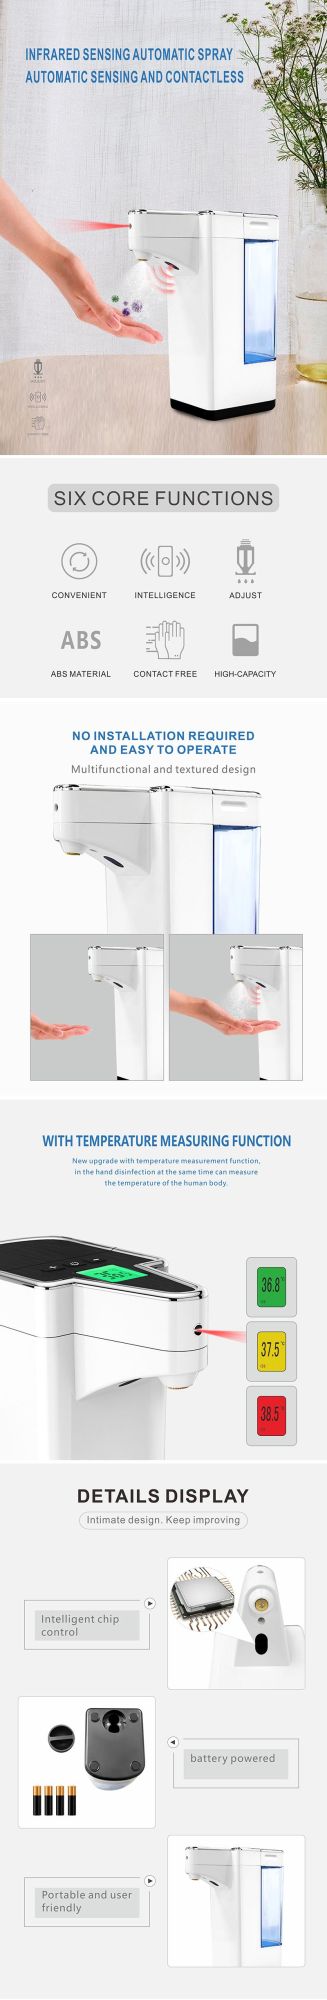 600ml Automatic Alcohol Dispenser for Home Infrared Induction Touchless Alcohol Sprayer Dispenser